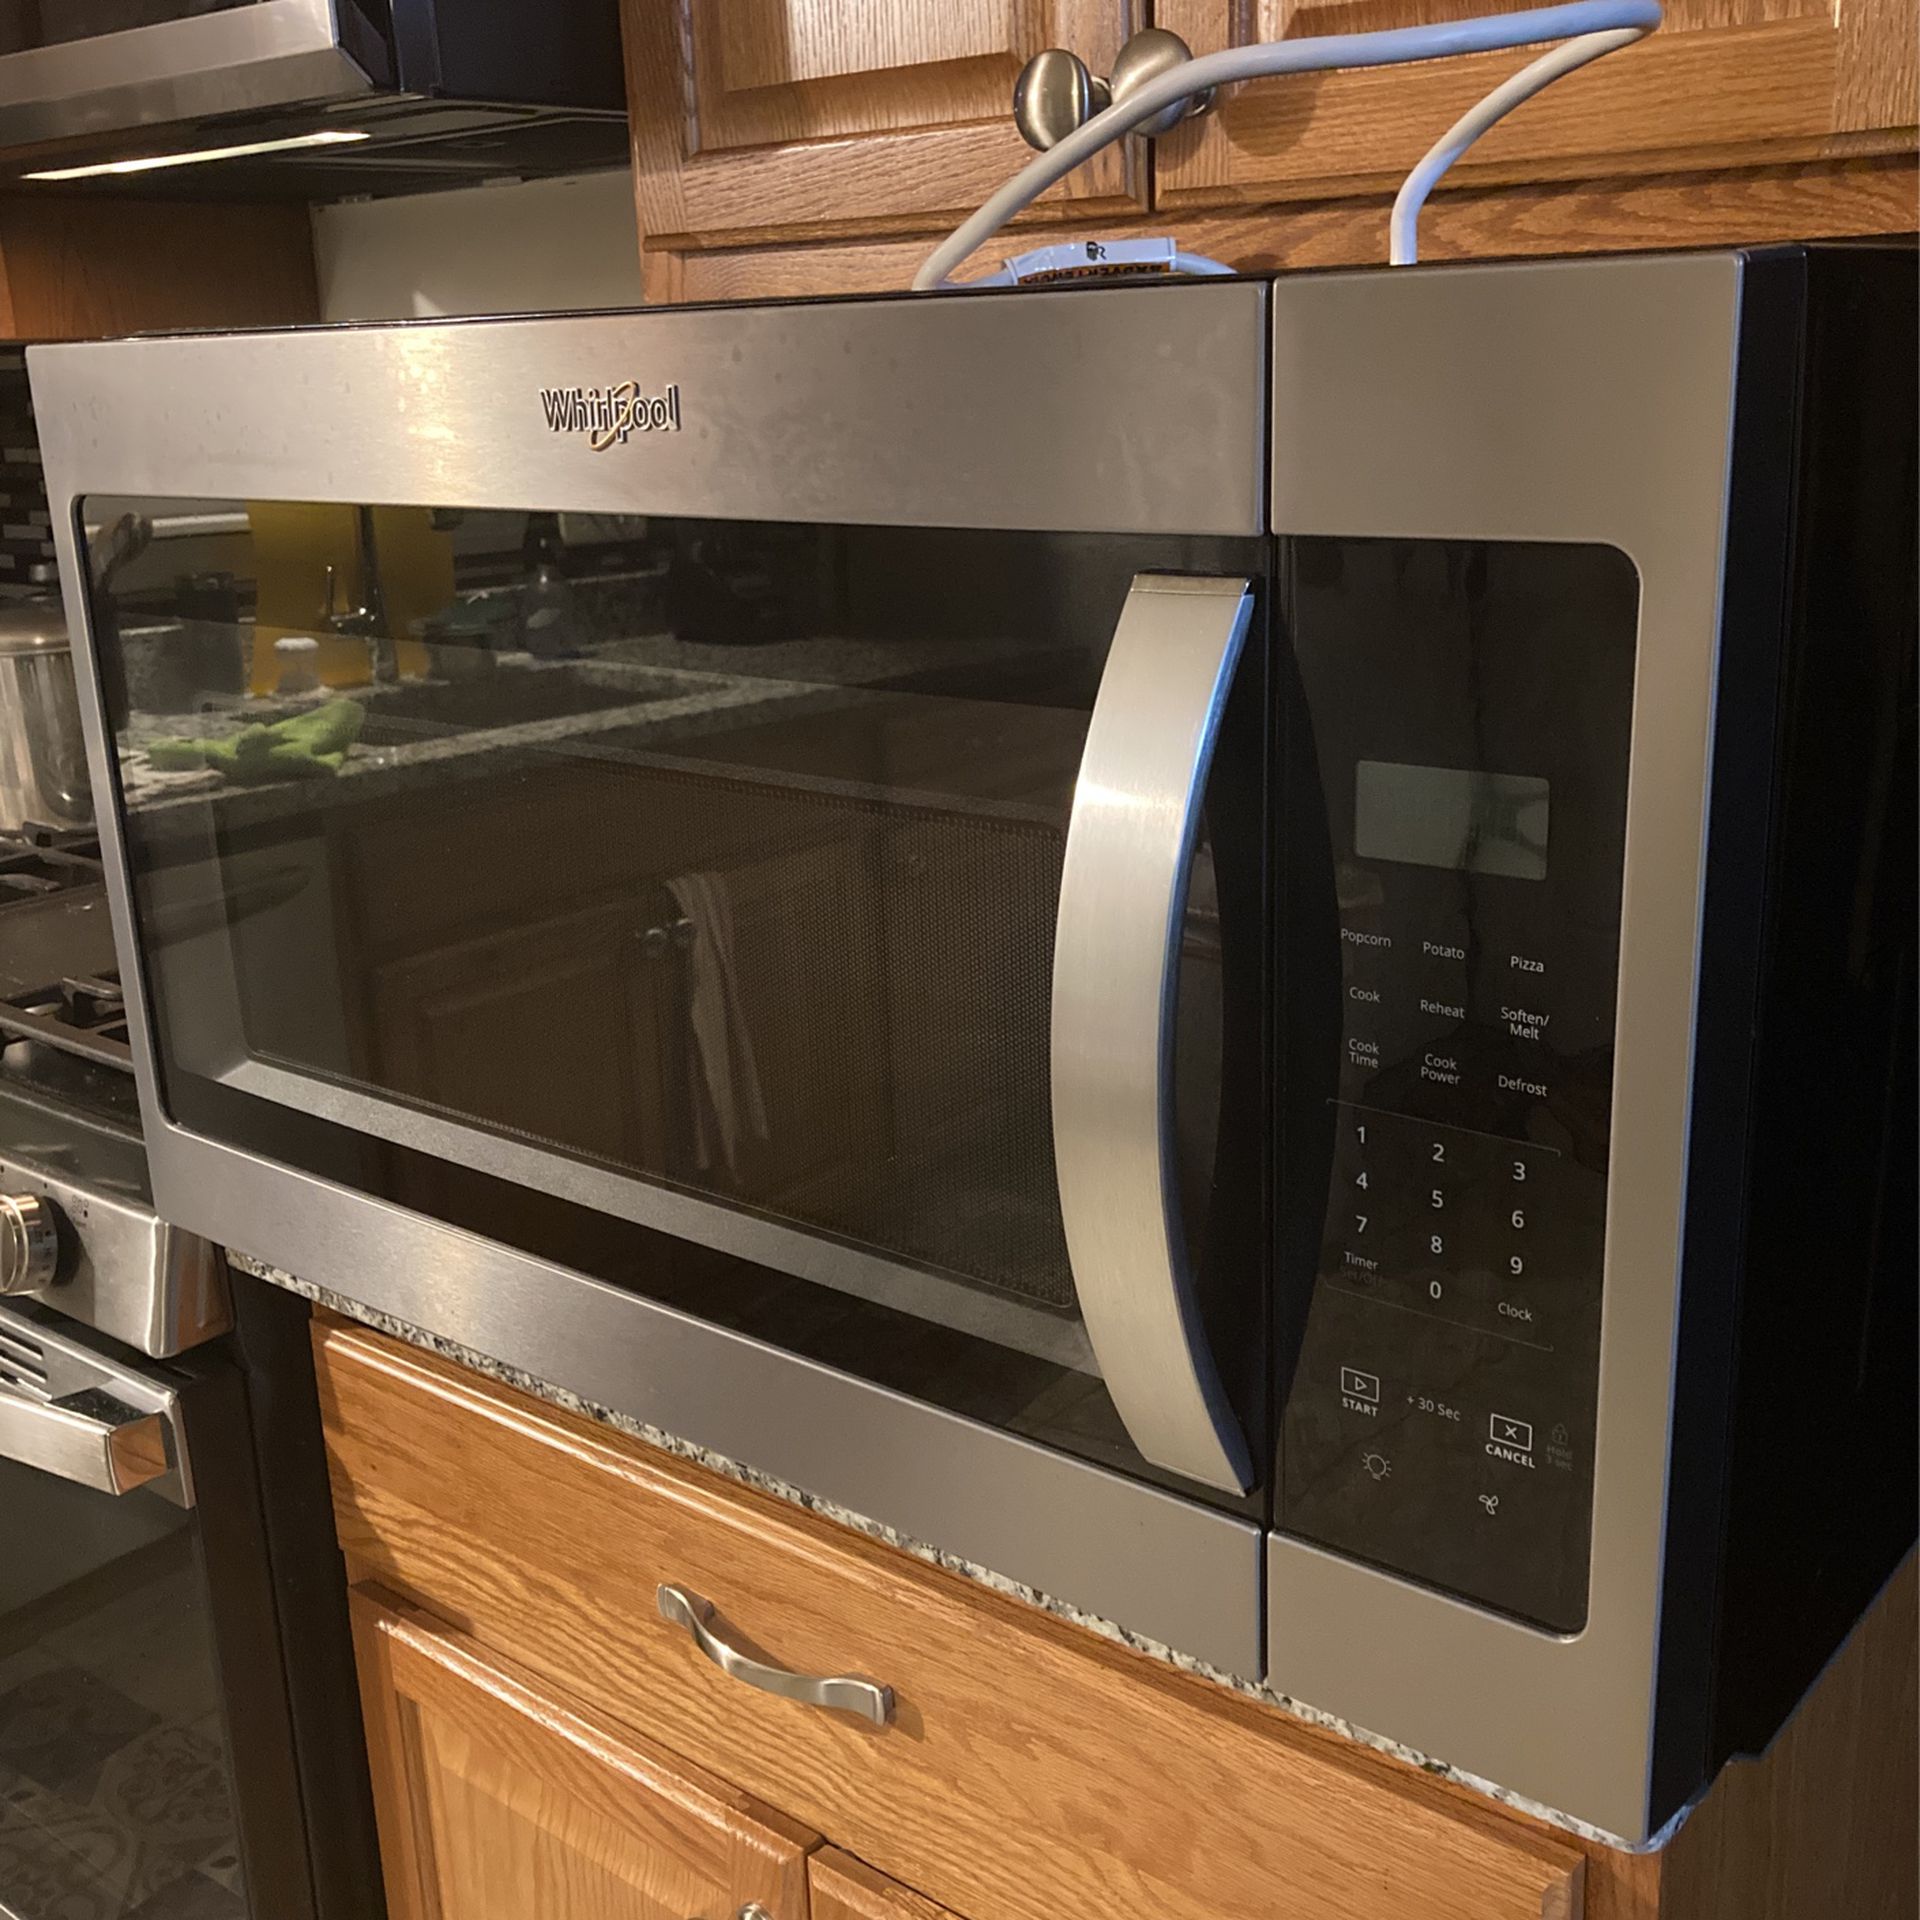 Over The Range Microwave Oven 